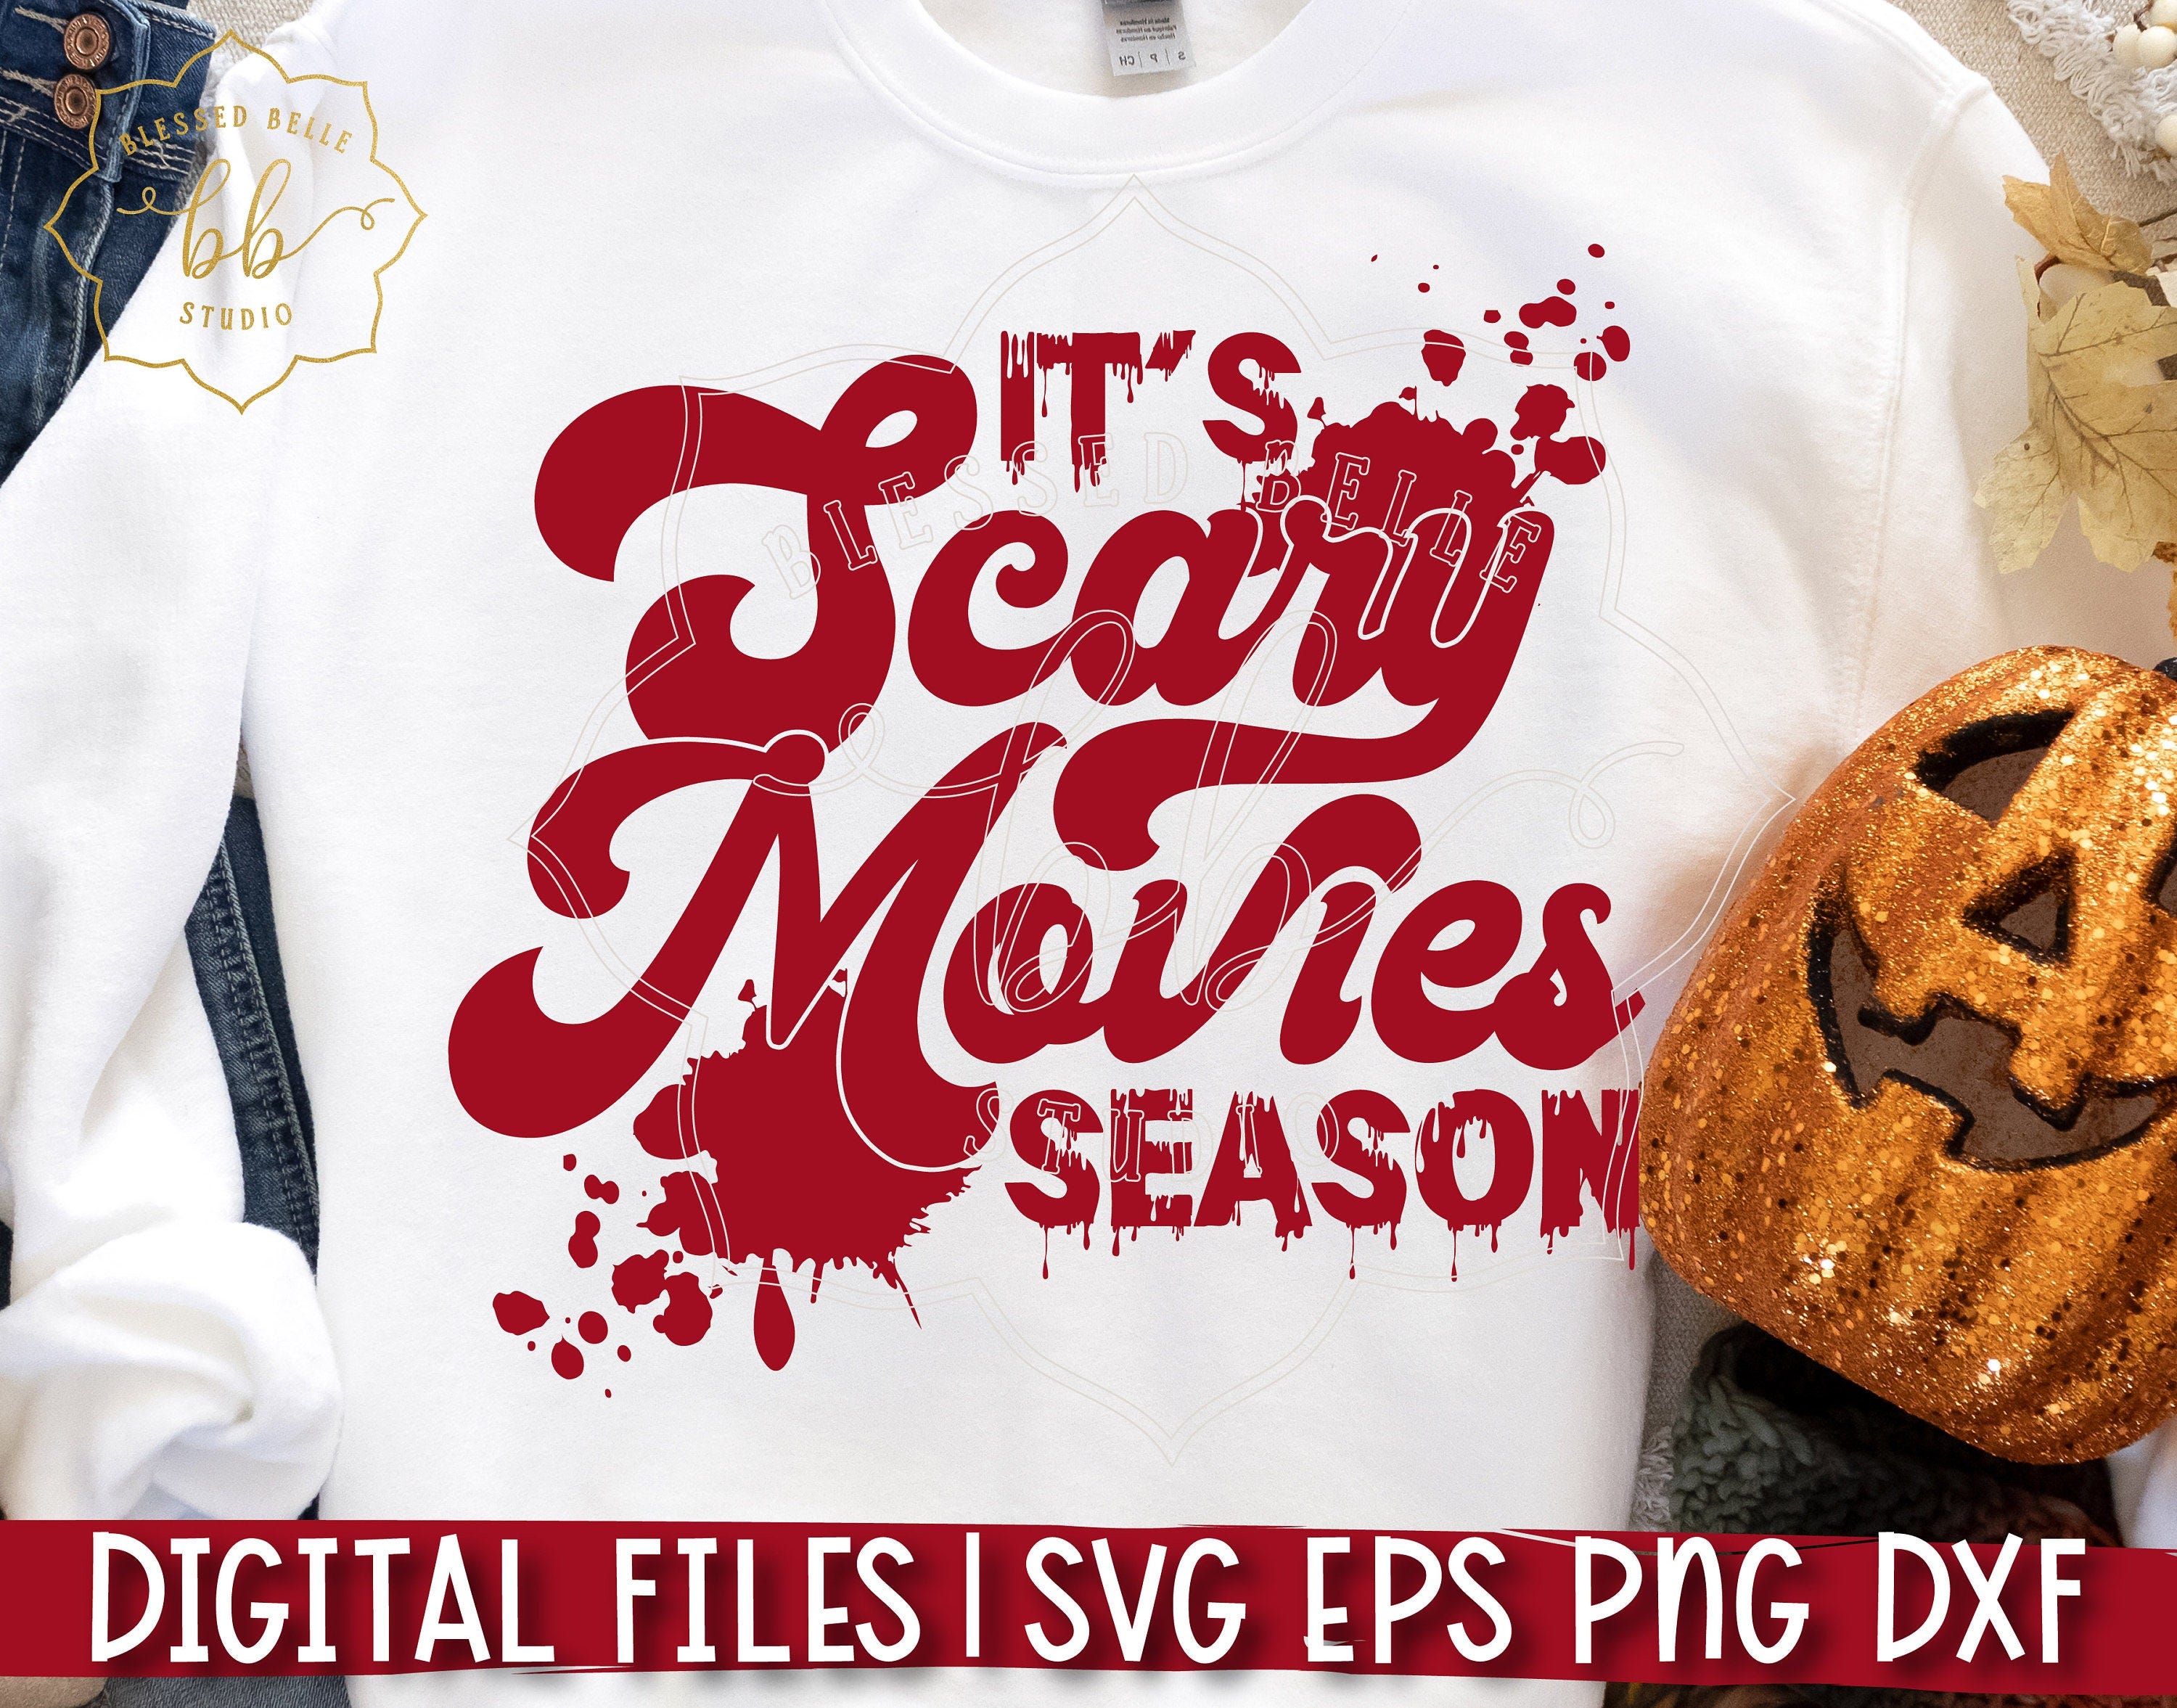 scary movies svg, halloween svg eps png dxf, scary movies season, horror movie, halloween shirt design, cut file, digital, print file